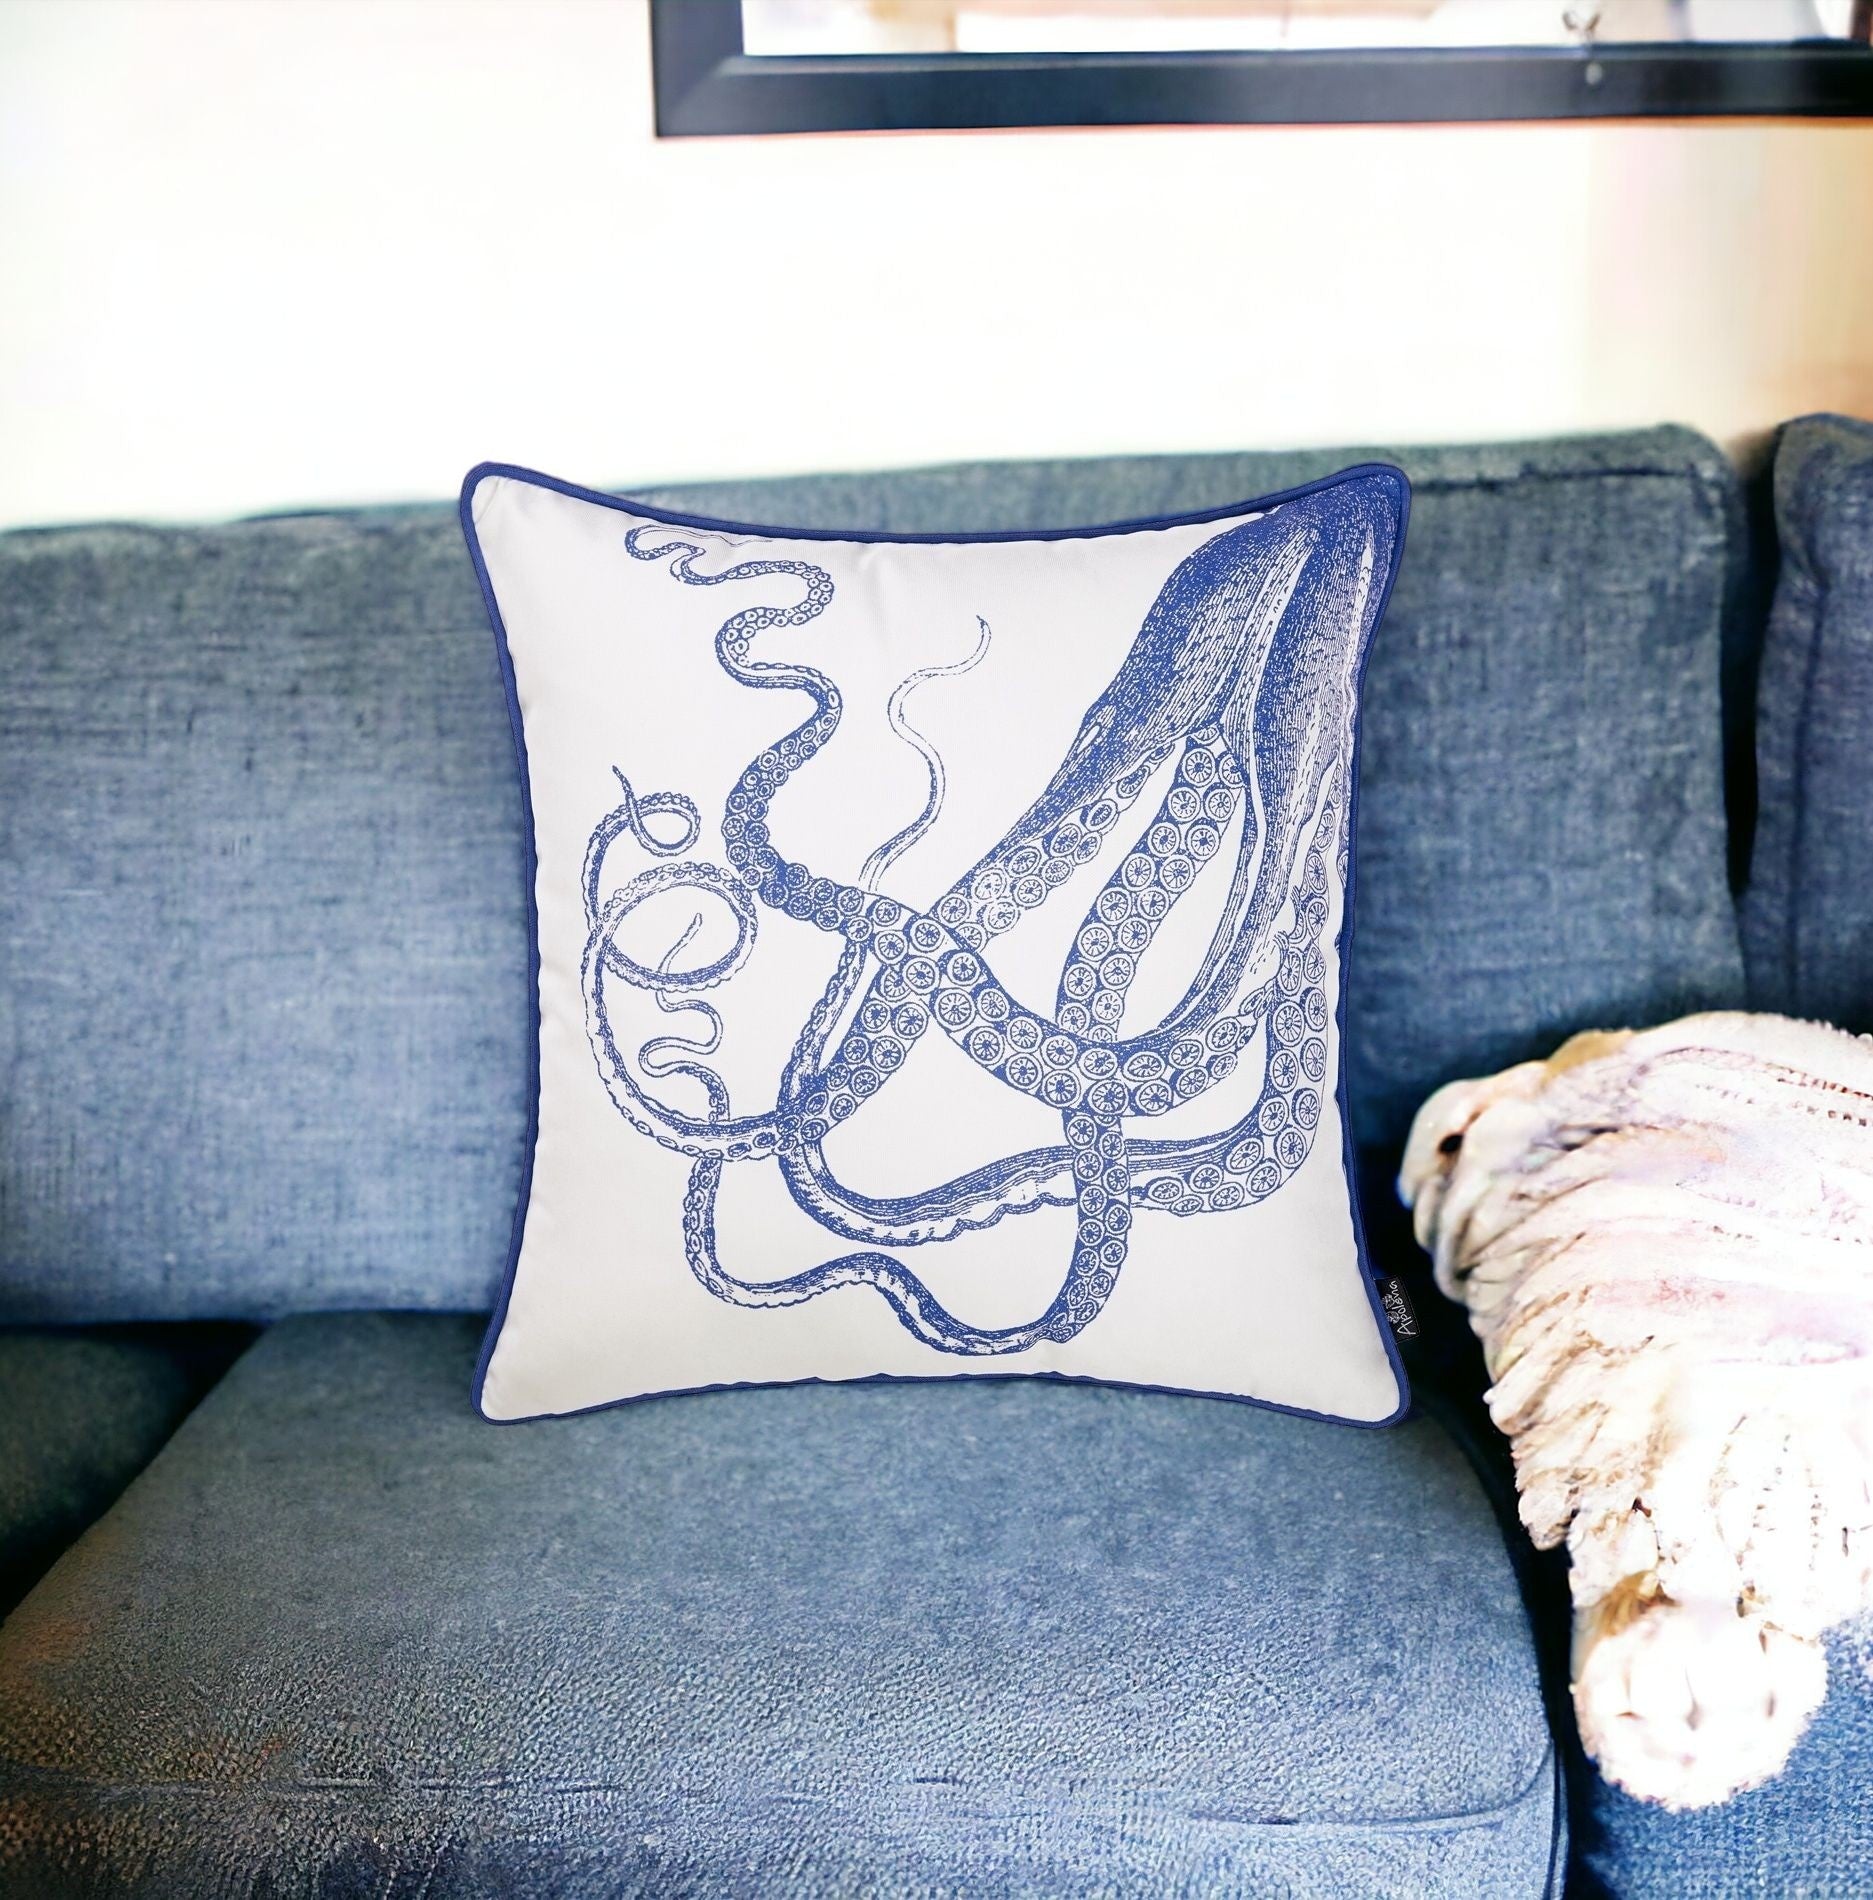 18" White And Blue Octopus Decorative Throw Pillow Cover